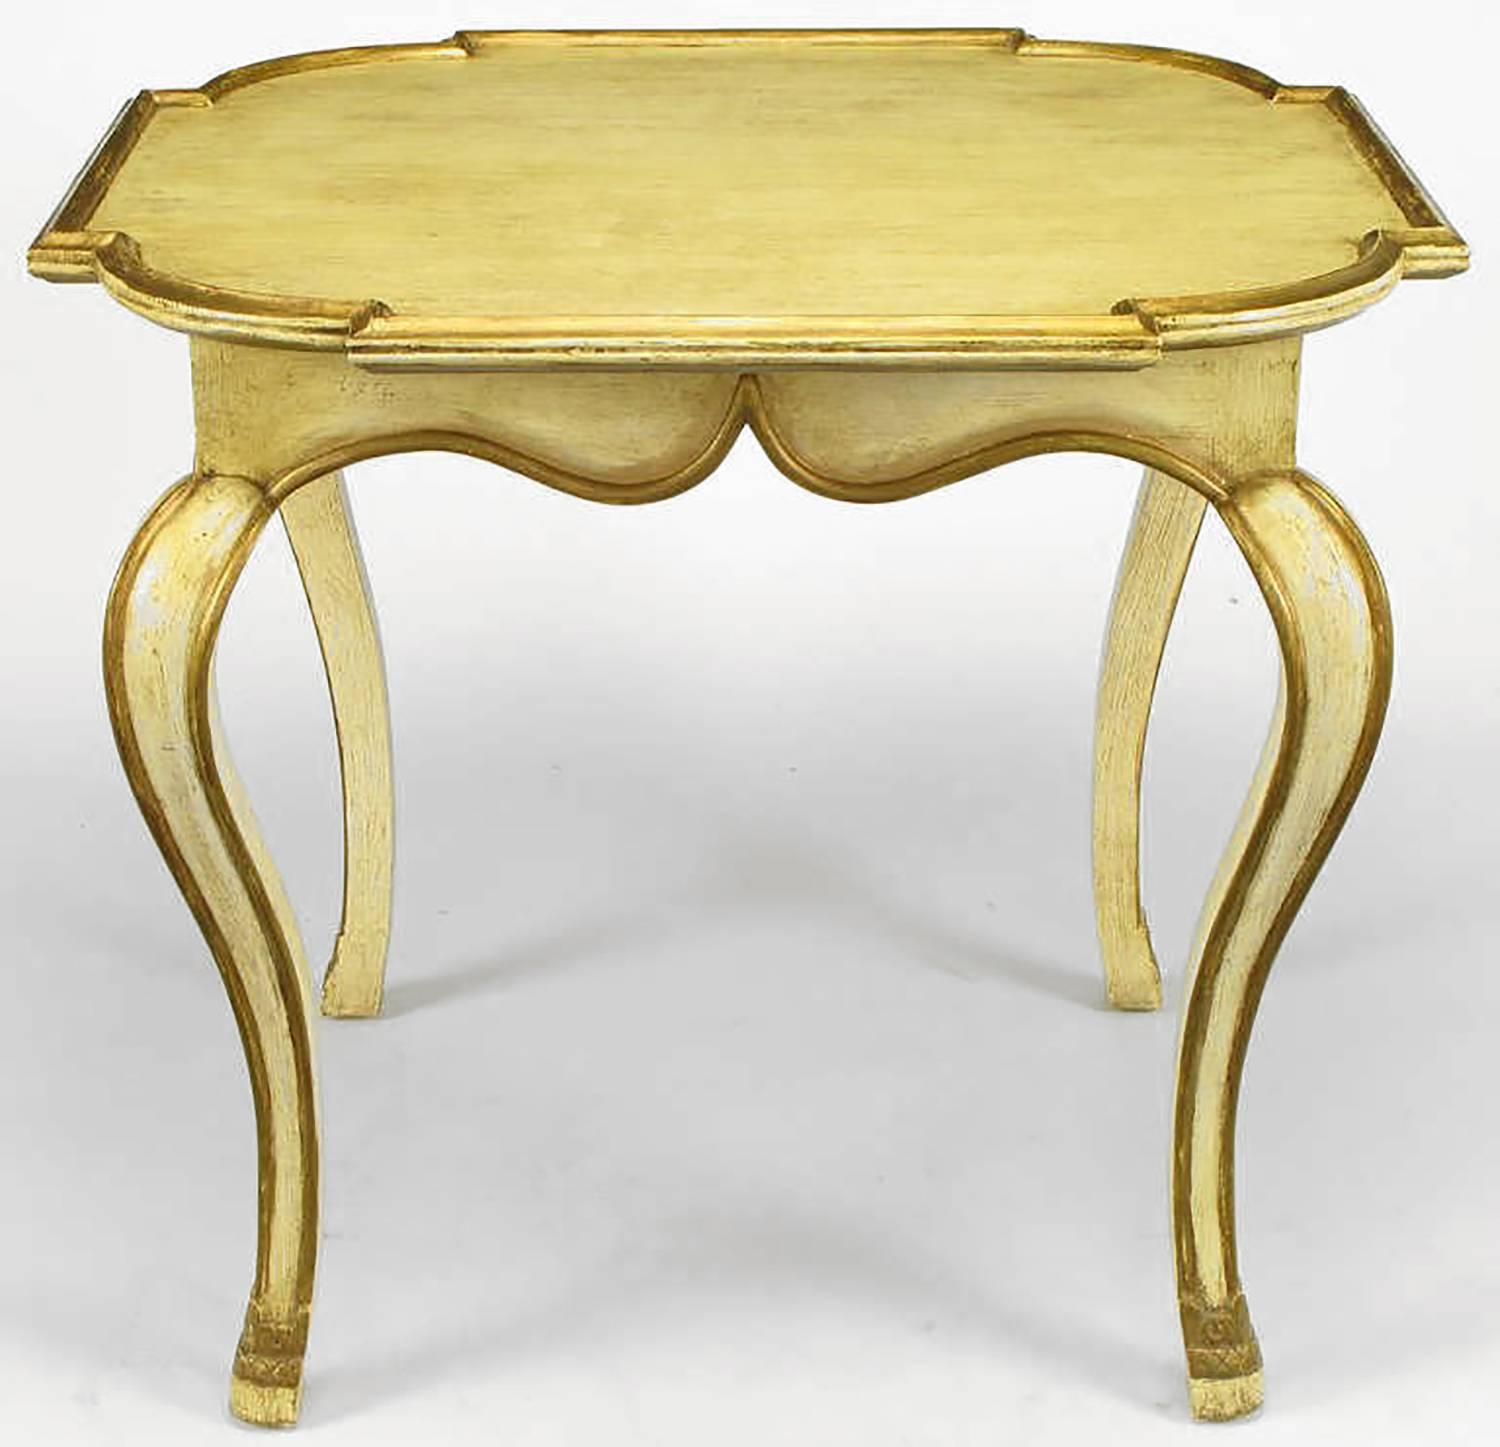 Neoclassical Pair of Minton-Spidell Parcel Gilt and Glazed Ivory Cabriole Leg End Tables